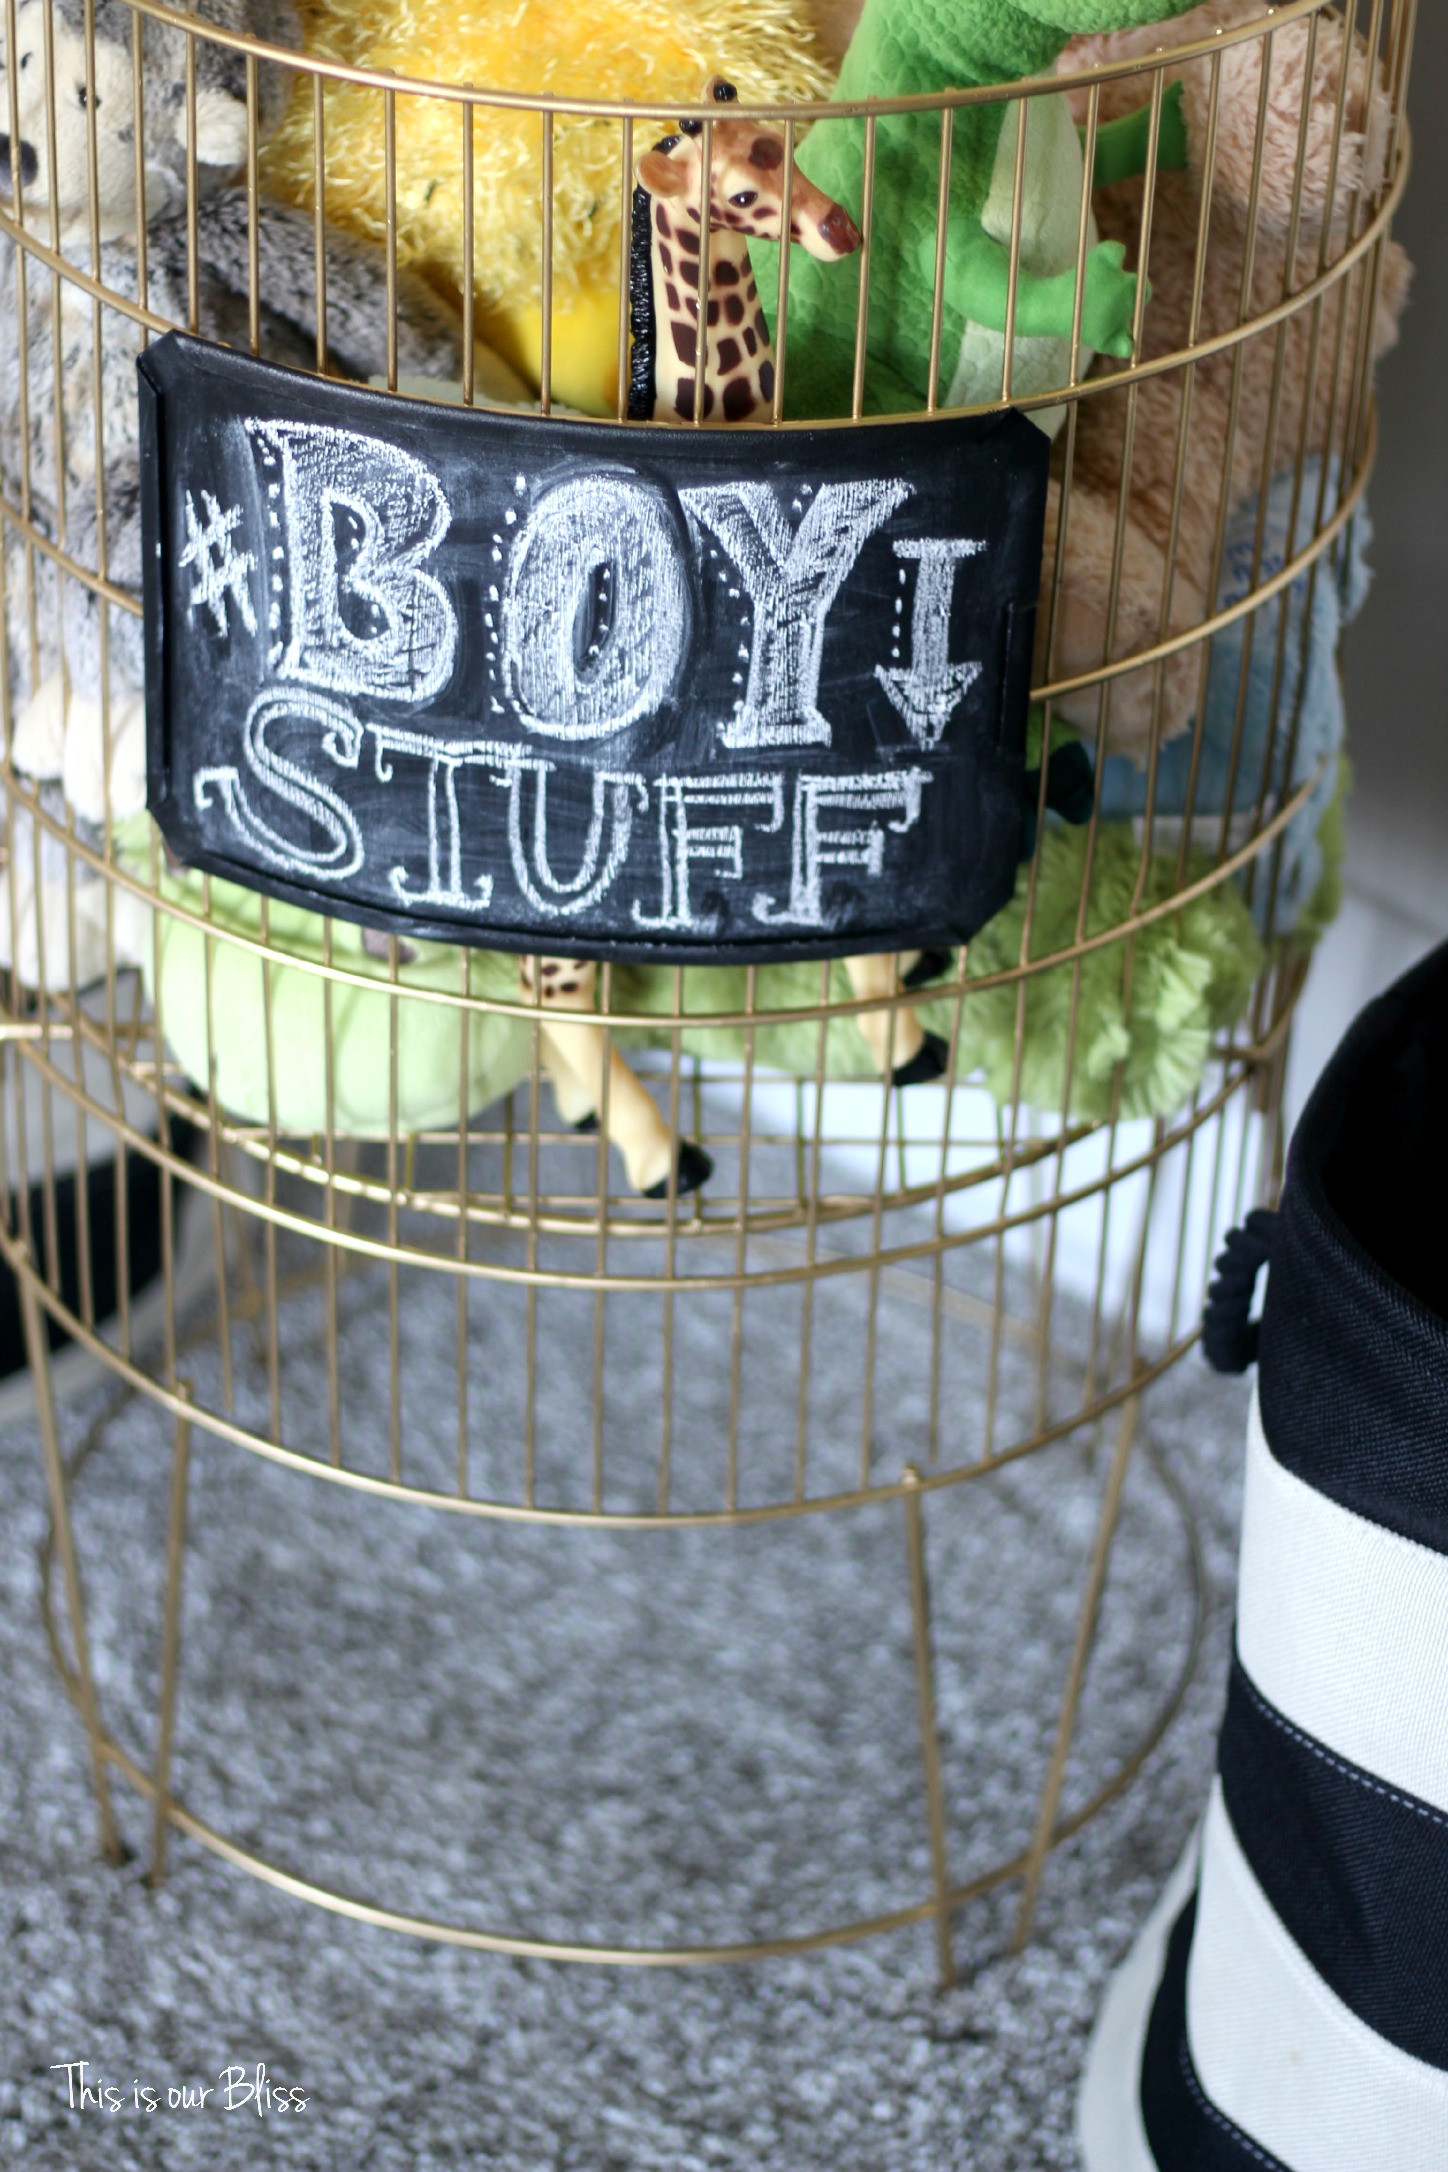 DIY metal toy bin gold spray paint & chalkboard paint boy stuff playroom kid space This is our Bliss